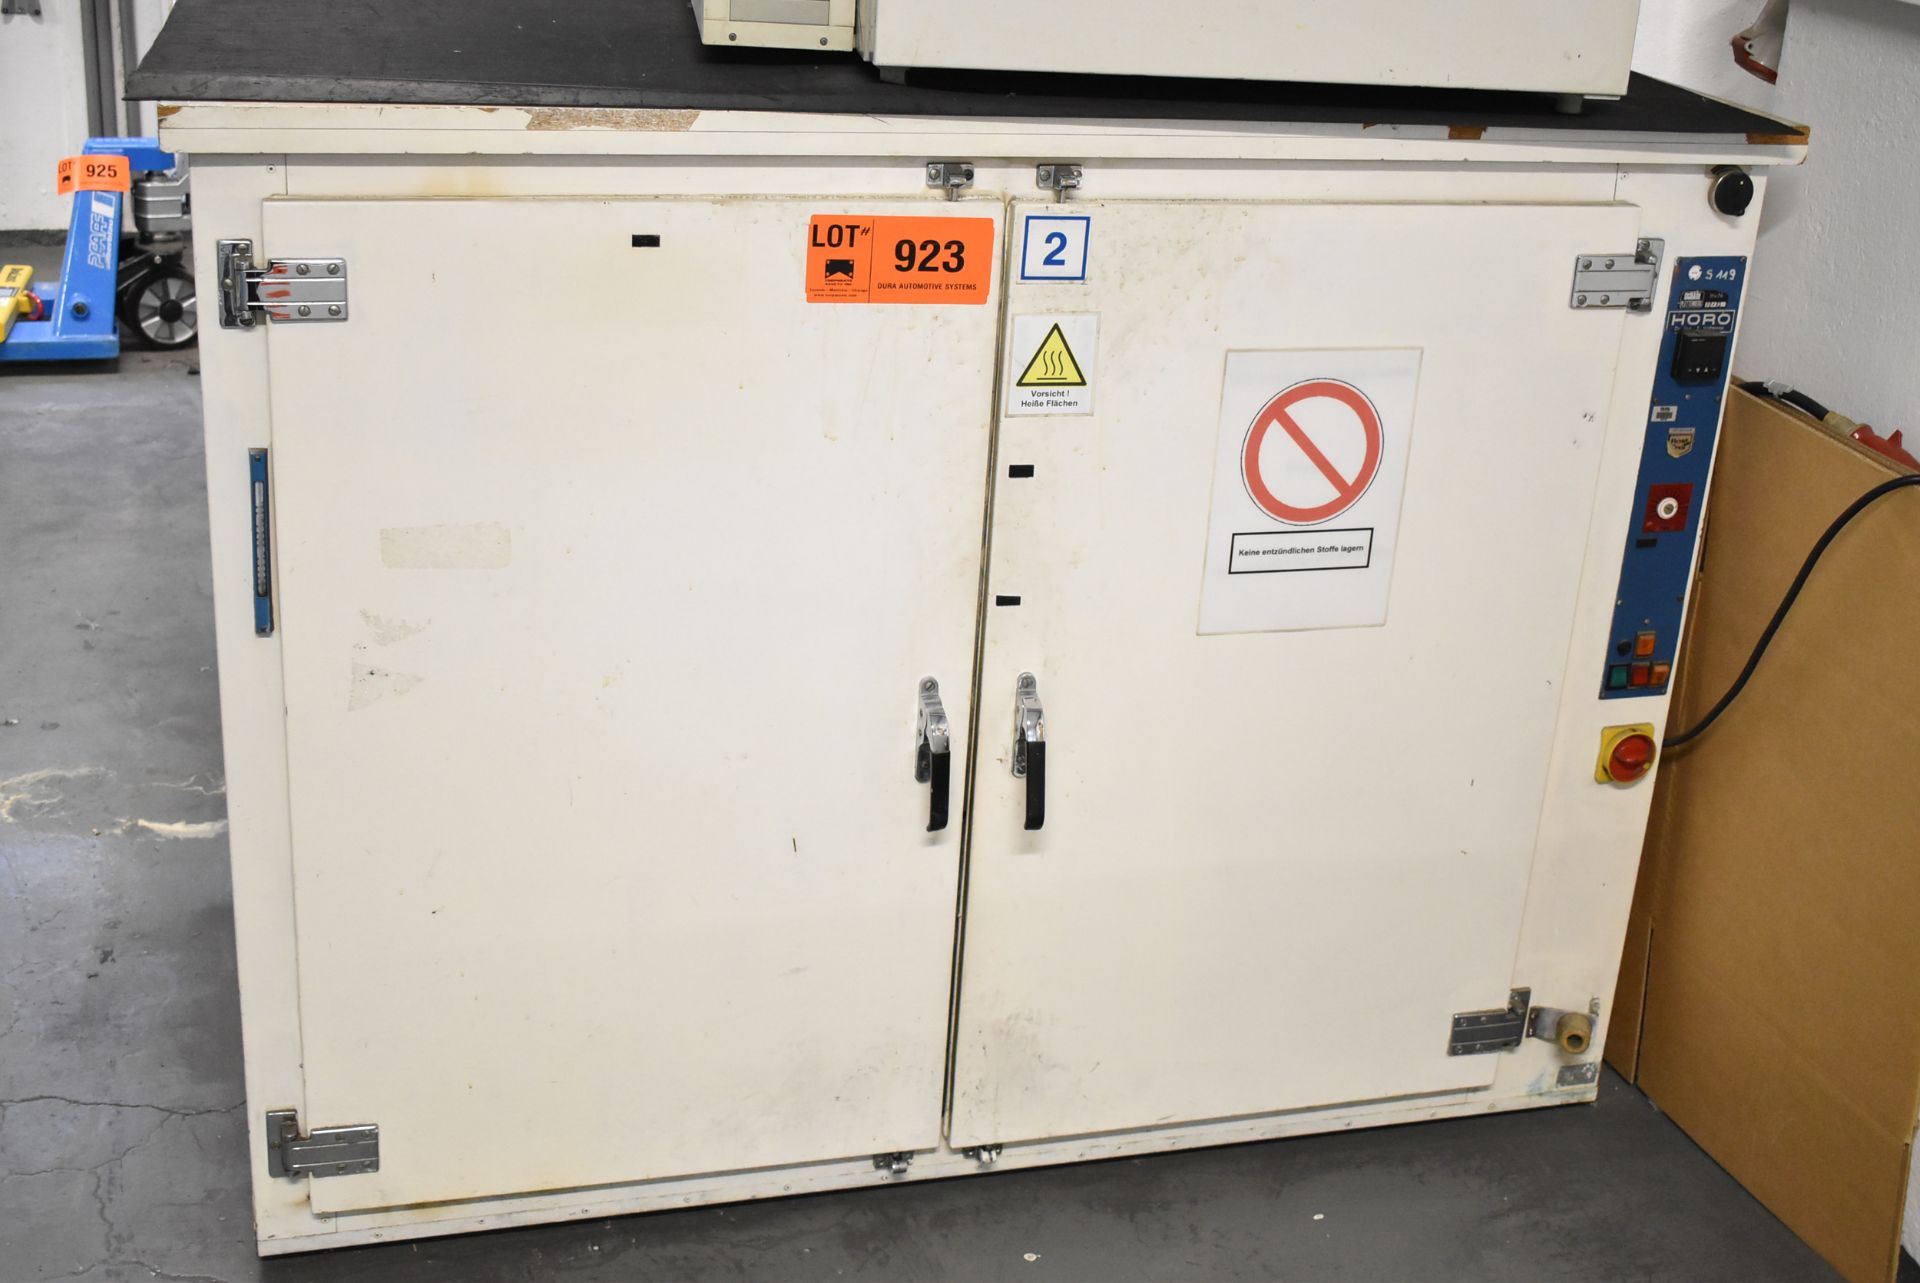 HORO 600V/SO ELECTRIC LAB OVEN WITH 150 DEG. C MAX. TEMP., S/N N/A (BAU 23) [Removal Fee = € 55 +